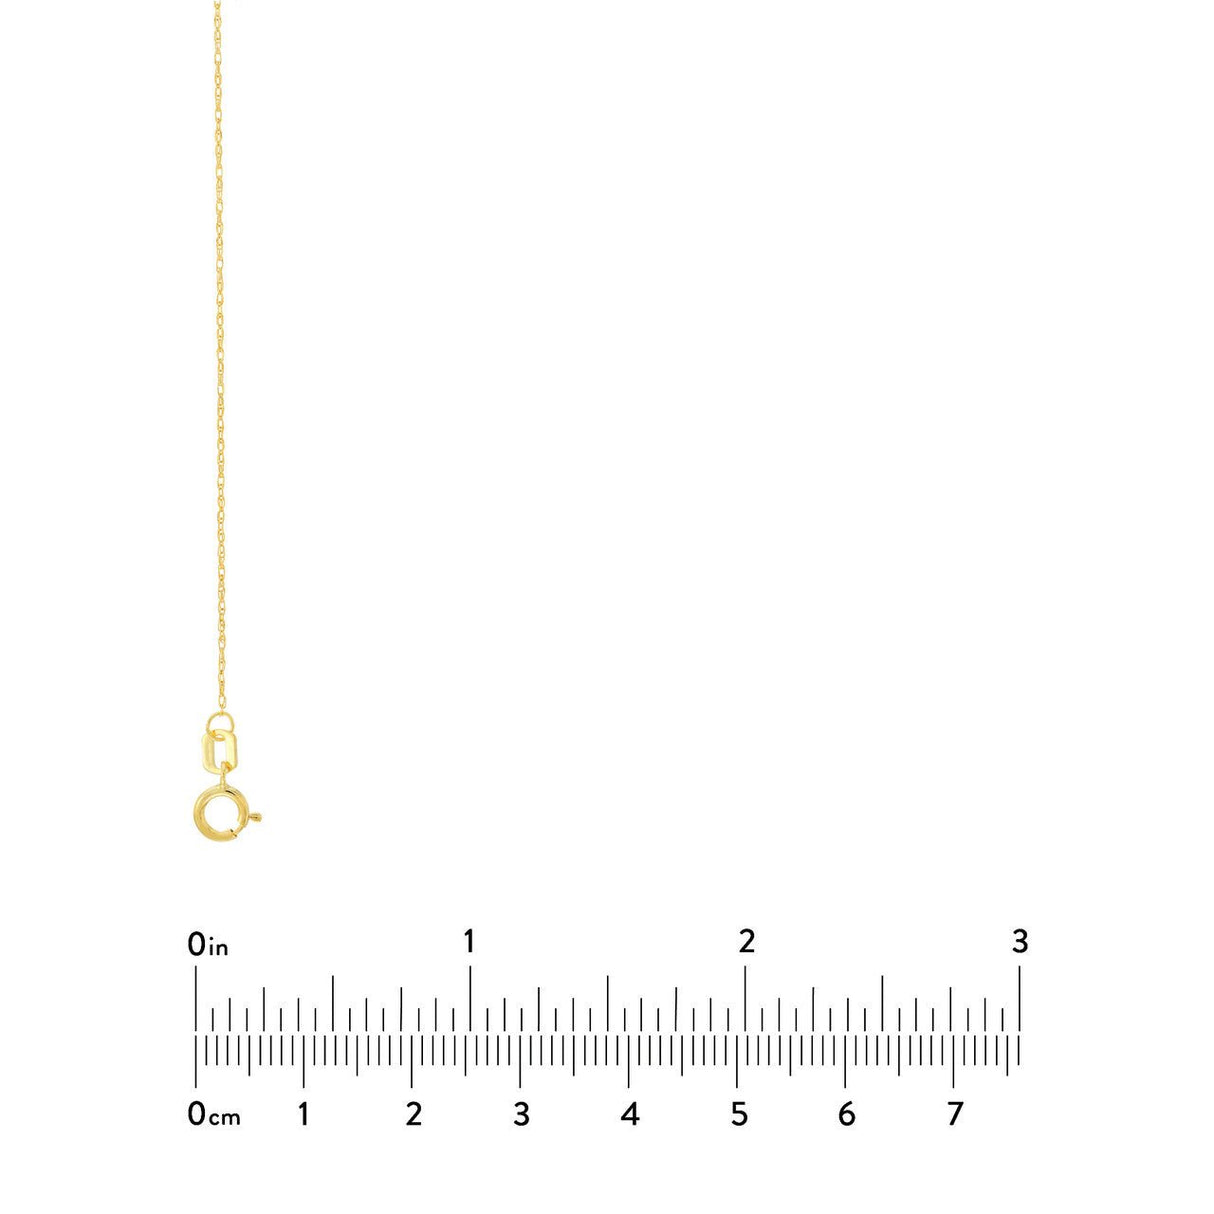 14K Gold Chain, 18", 0.65mm Pendant Rope Chain with Spring Ring, Gold Layered Chain, Gold Necklaces, - Diamond Origin